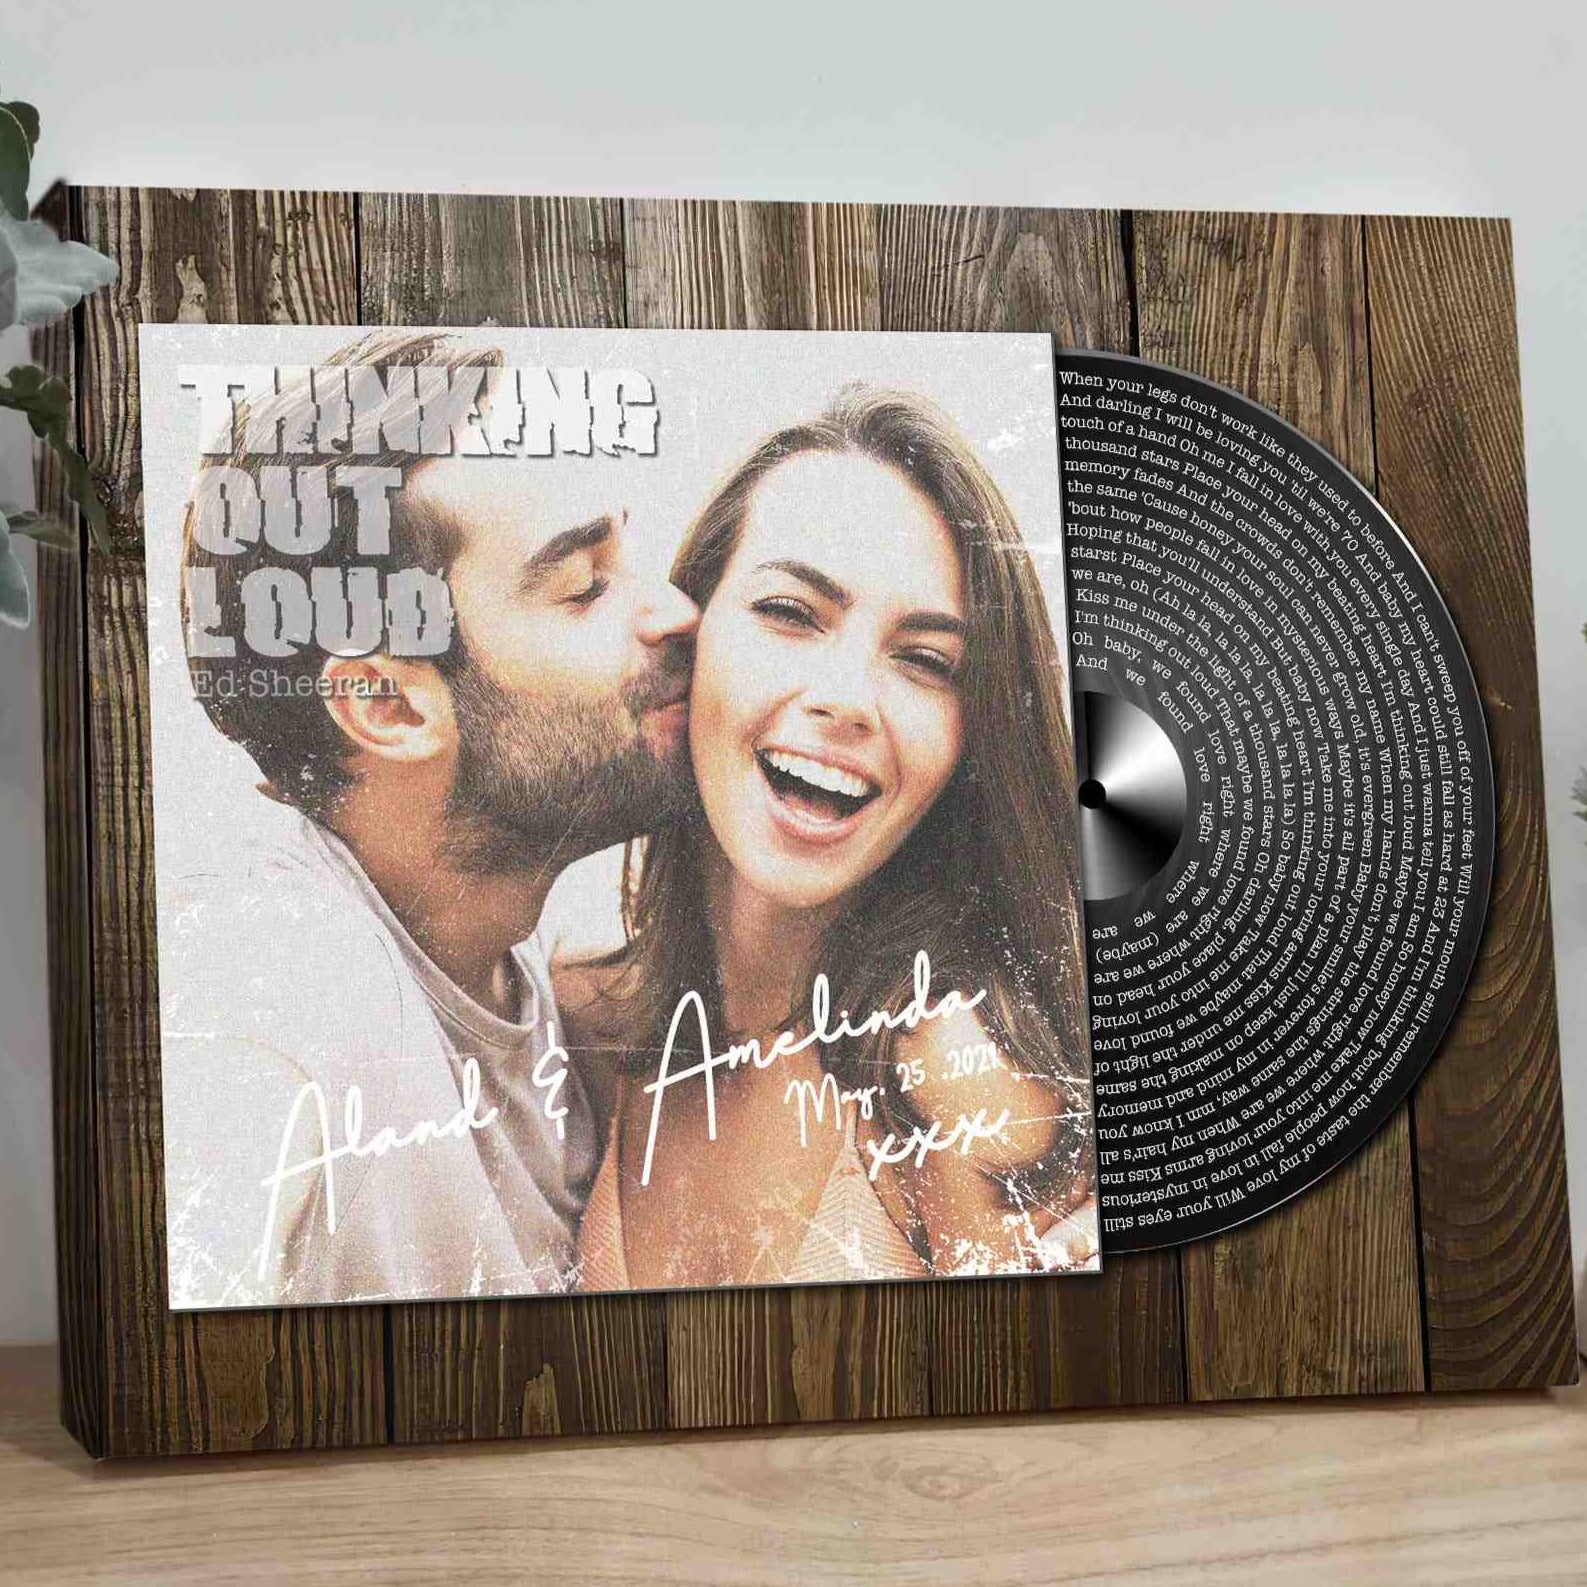 2 Year Anniversary Gift Ideas for My Boyfriend Canvas Art, Personalised  Valentines Day Gifts for Girlfriend, Canvas Wall Art - Magic Exhalation